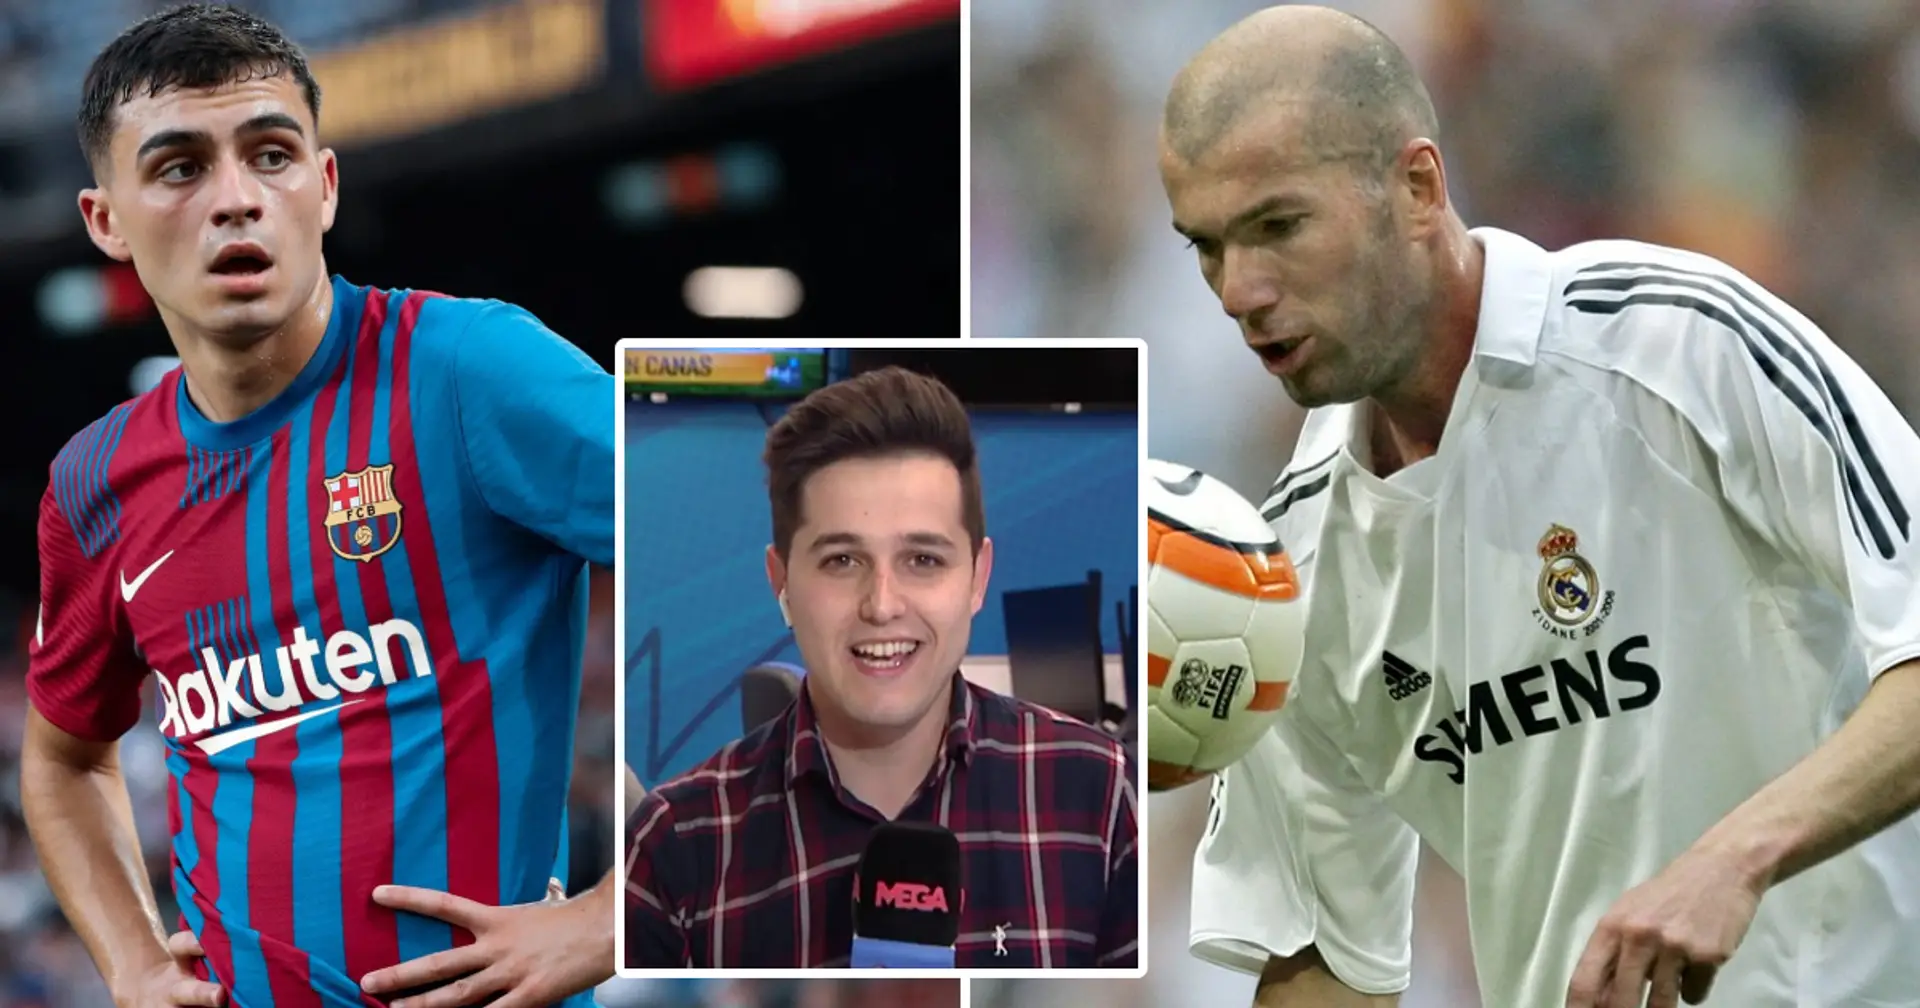 Reporter claims Barcelona midfielder Pedri is better than Zidane and Laudrup